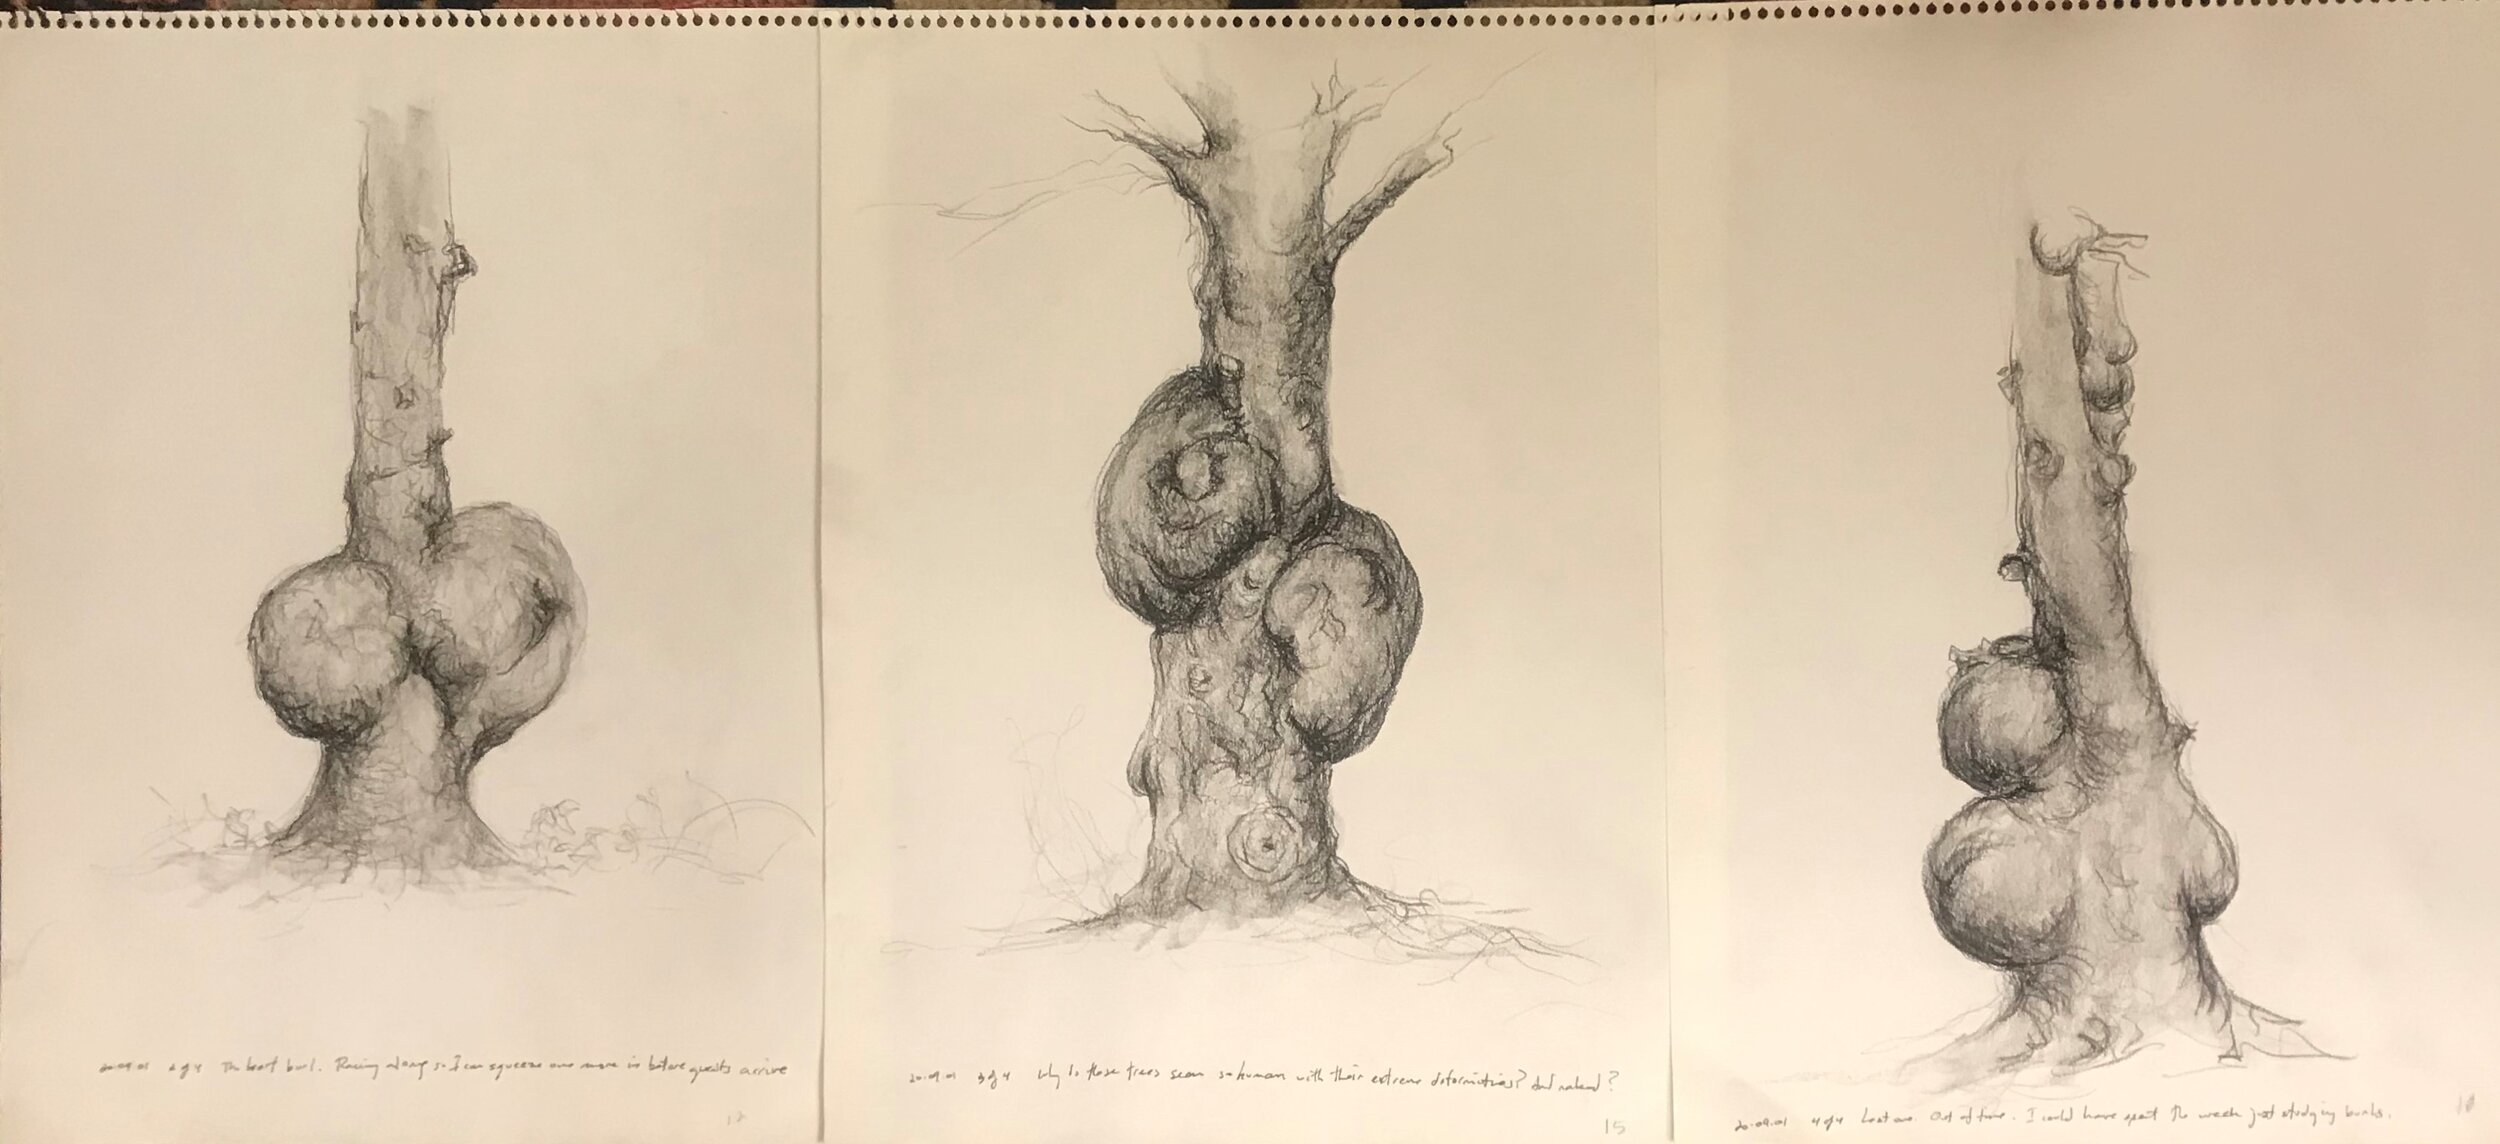 20-09-01 Three Spruces with Burls on Bremen LI  Charcoal on Paper 11 x 14 inches.jpg